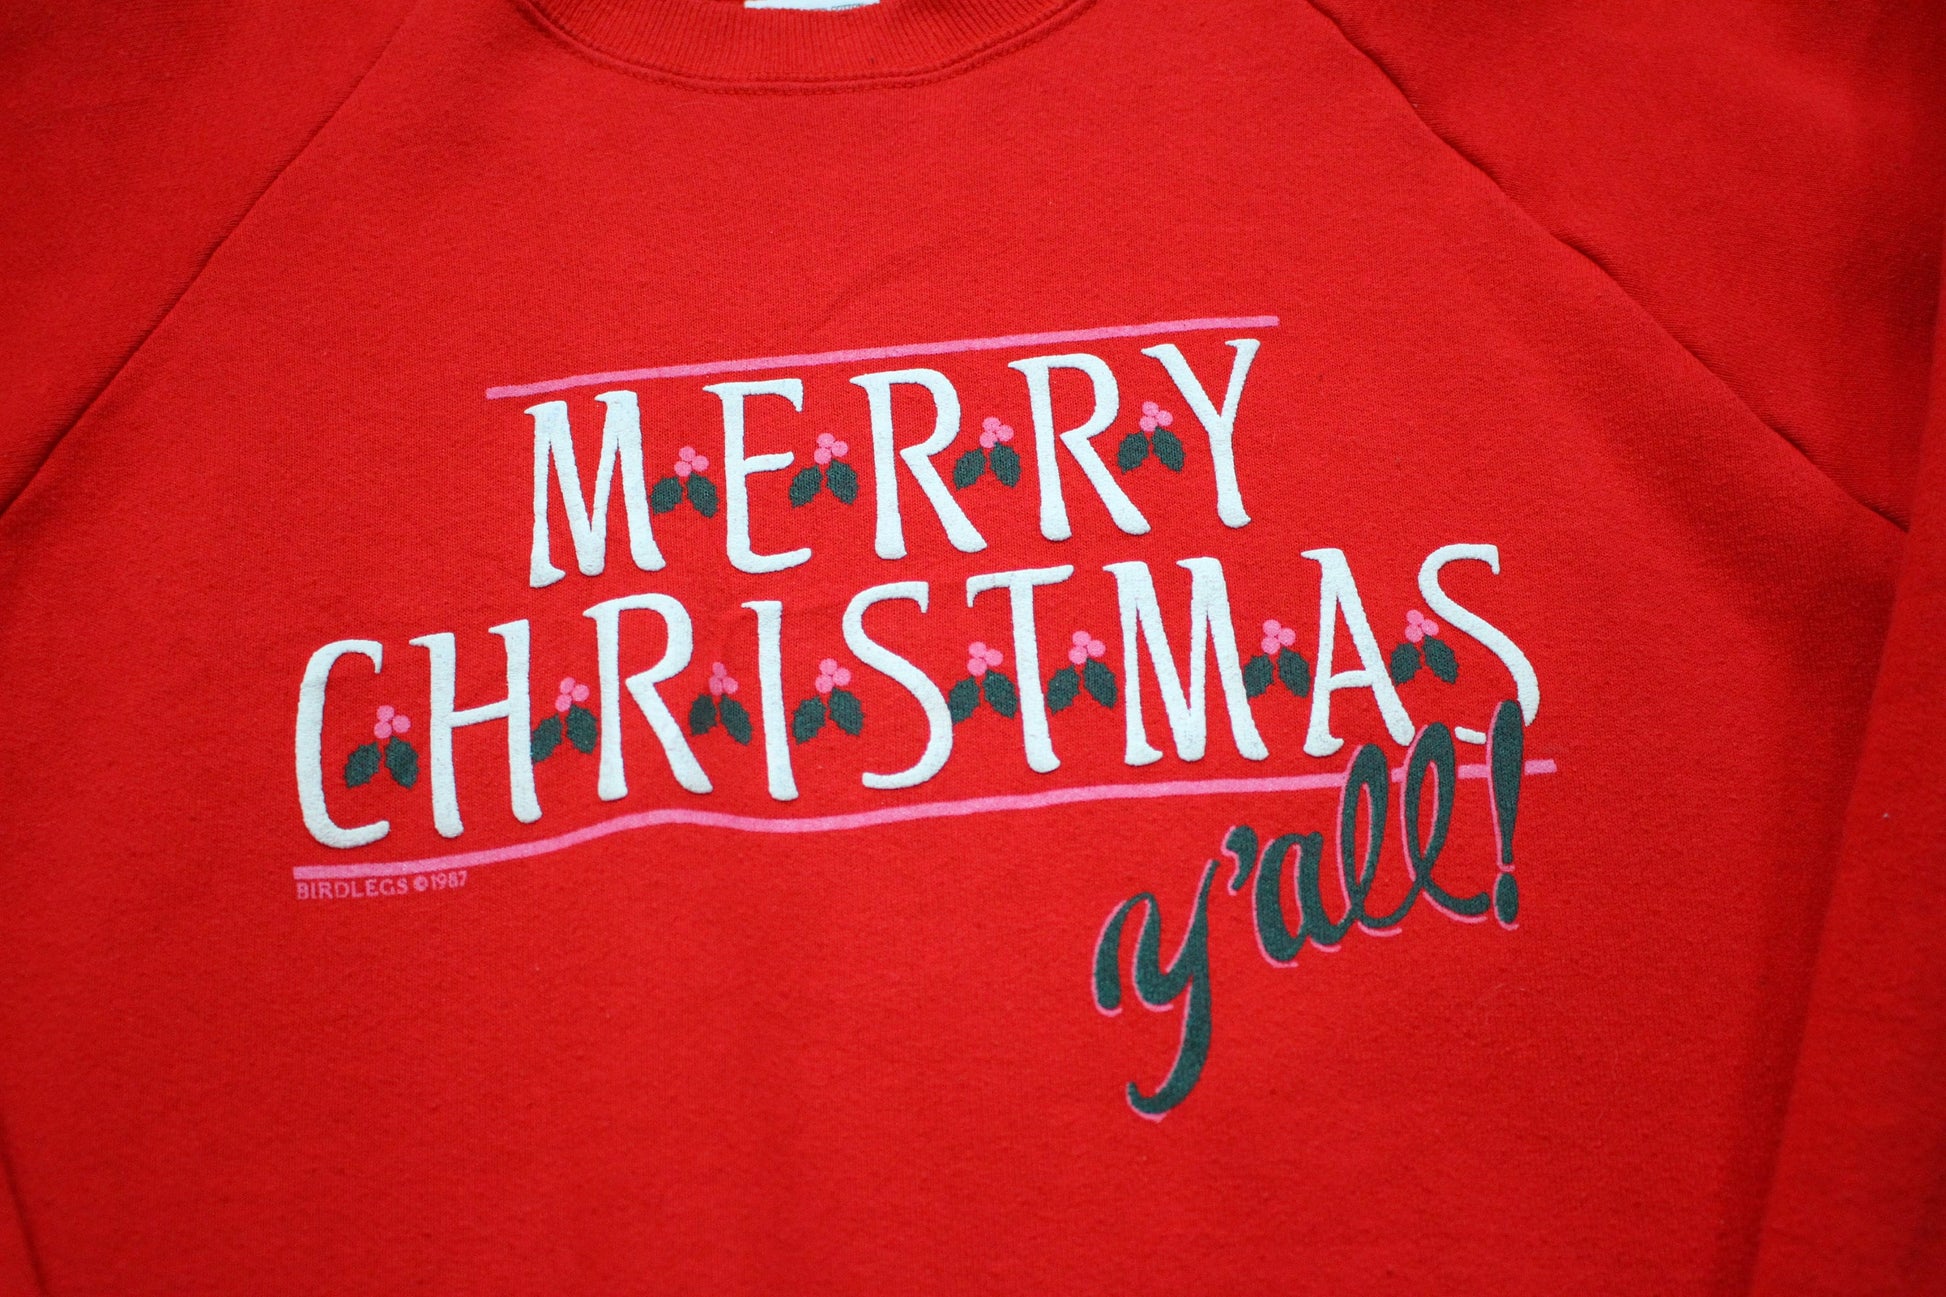 1980s 1987 Fruit of the Loom Merry Christmass Y'all Raglan Sweatshirt Made in USA Size L